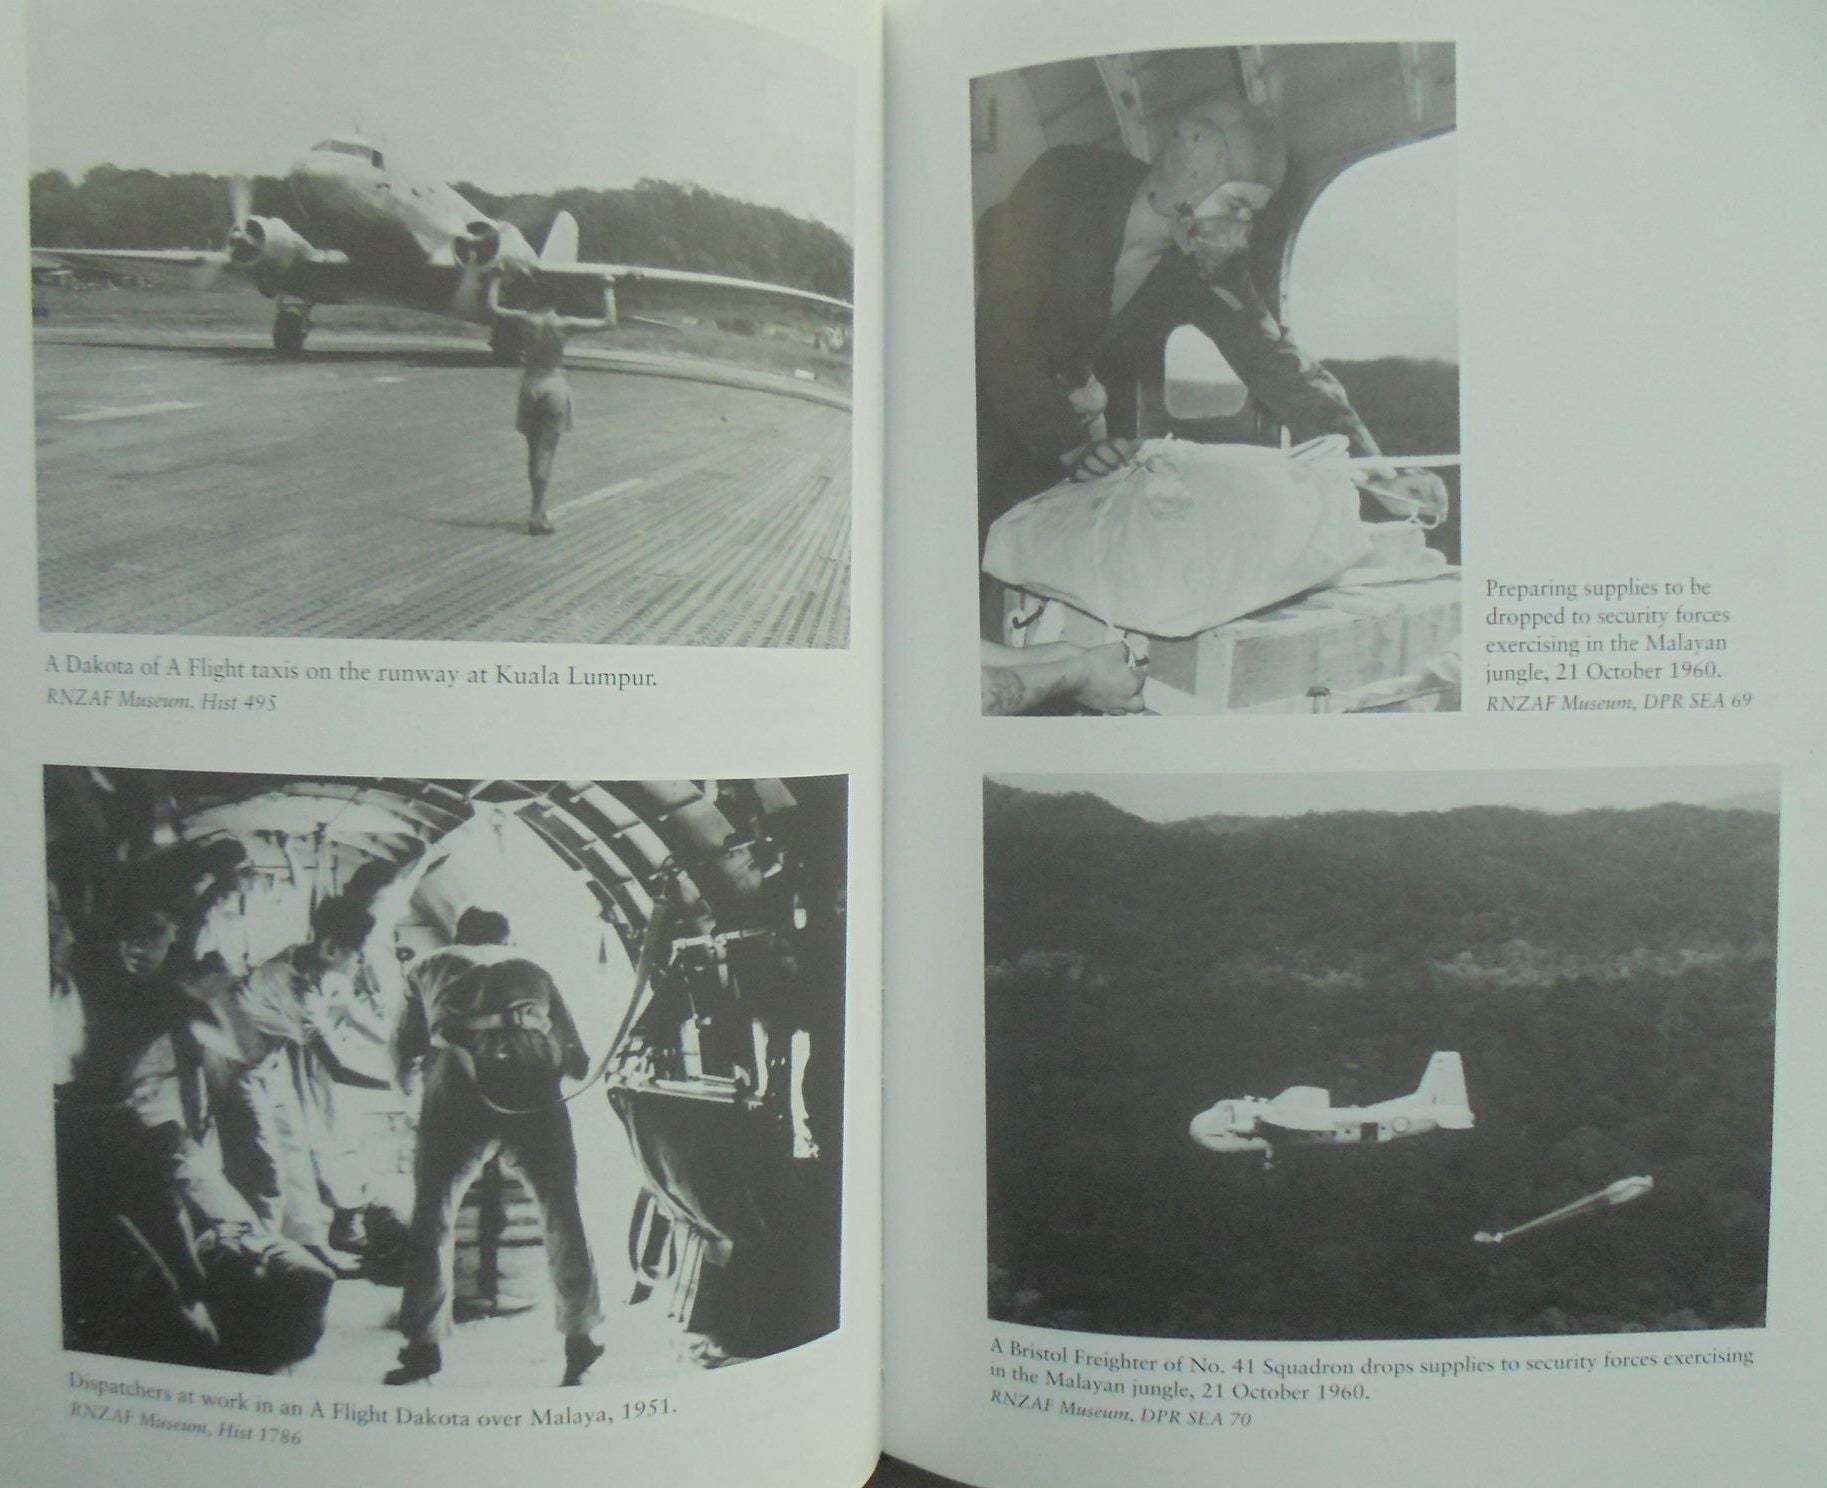 From Emergency to Confrontation The New Zealand Armed Forces in Malaya and Borneo 1949-1966 By Christopher Pugsley.